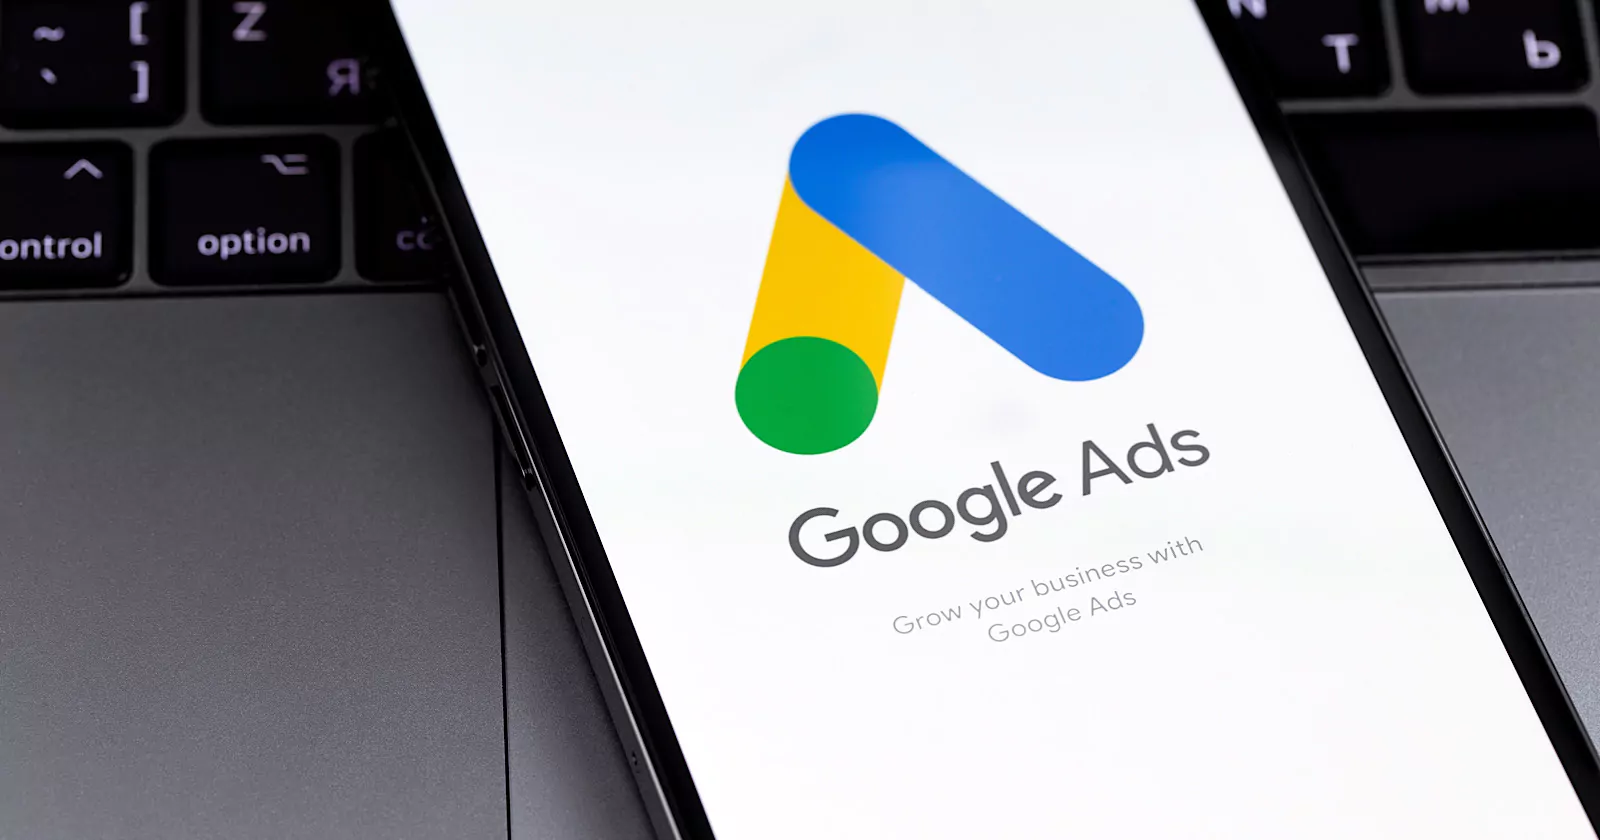 Google Ads New Pitch Premium Support For Small Advertisers!